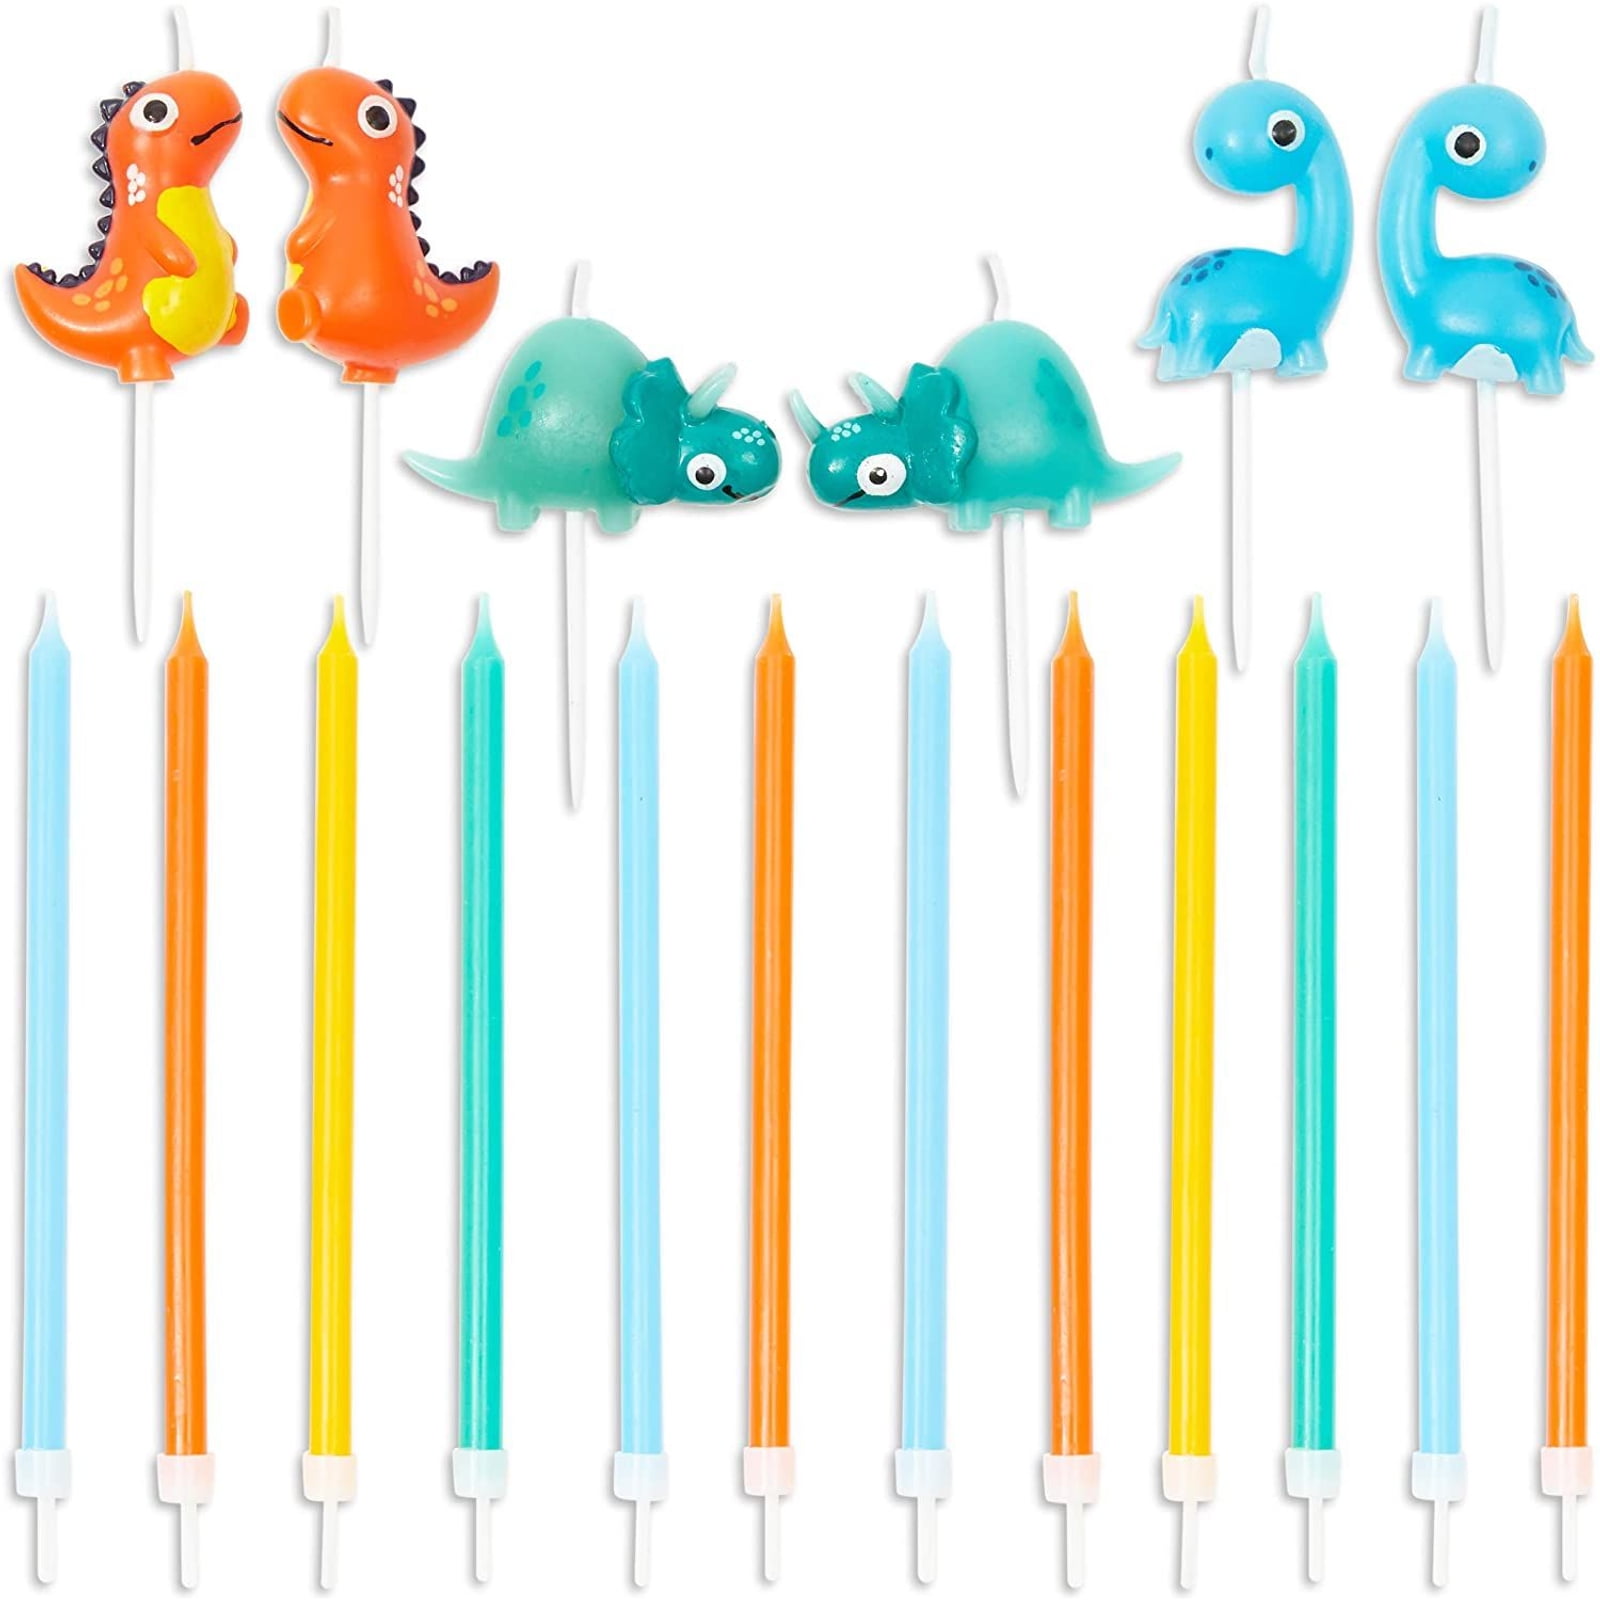 5pcs Dinosaur Candles Kid Birthday Party Cake Toppers Home Supplies Cartoon Cute